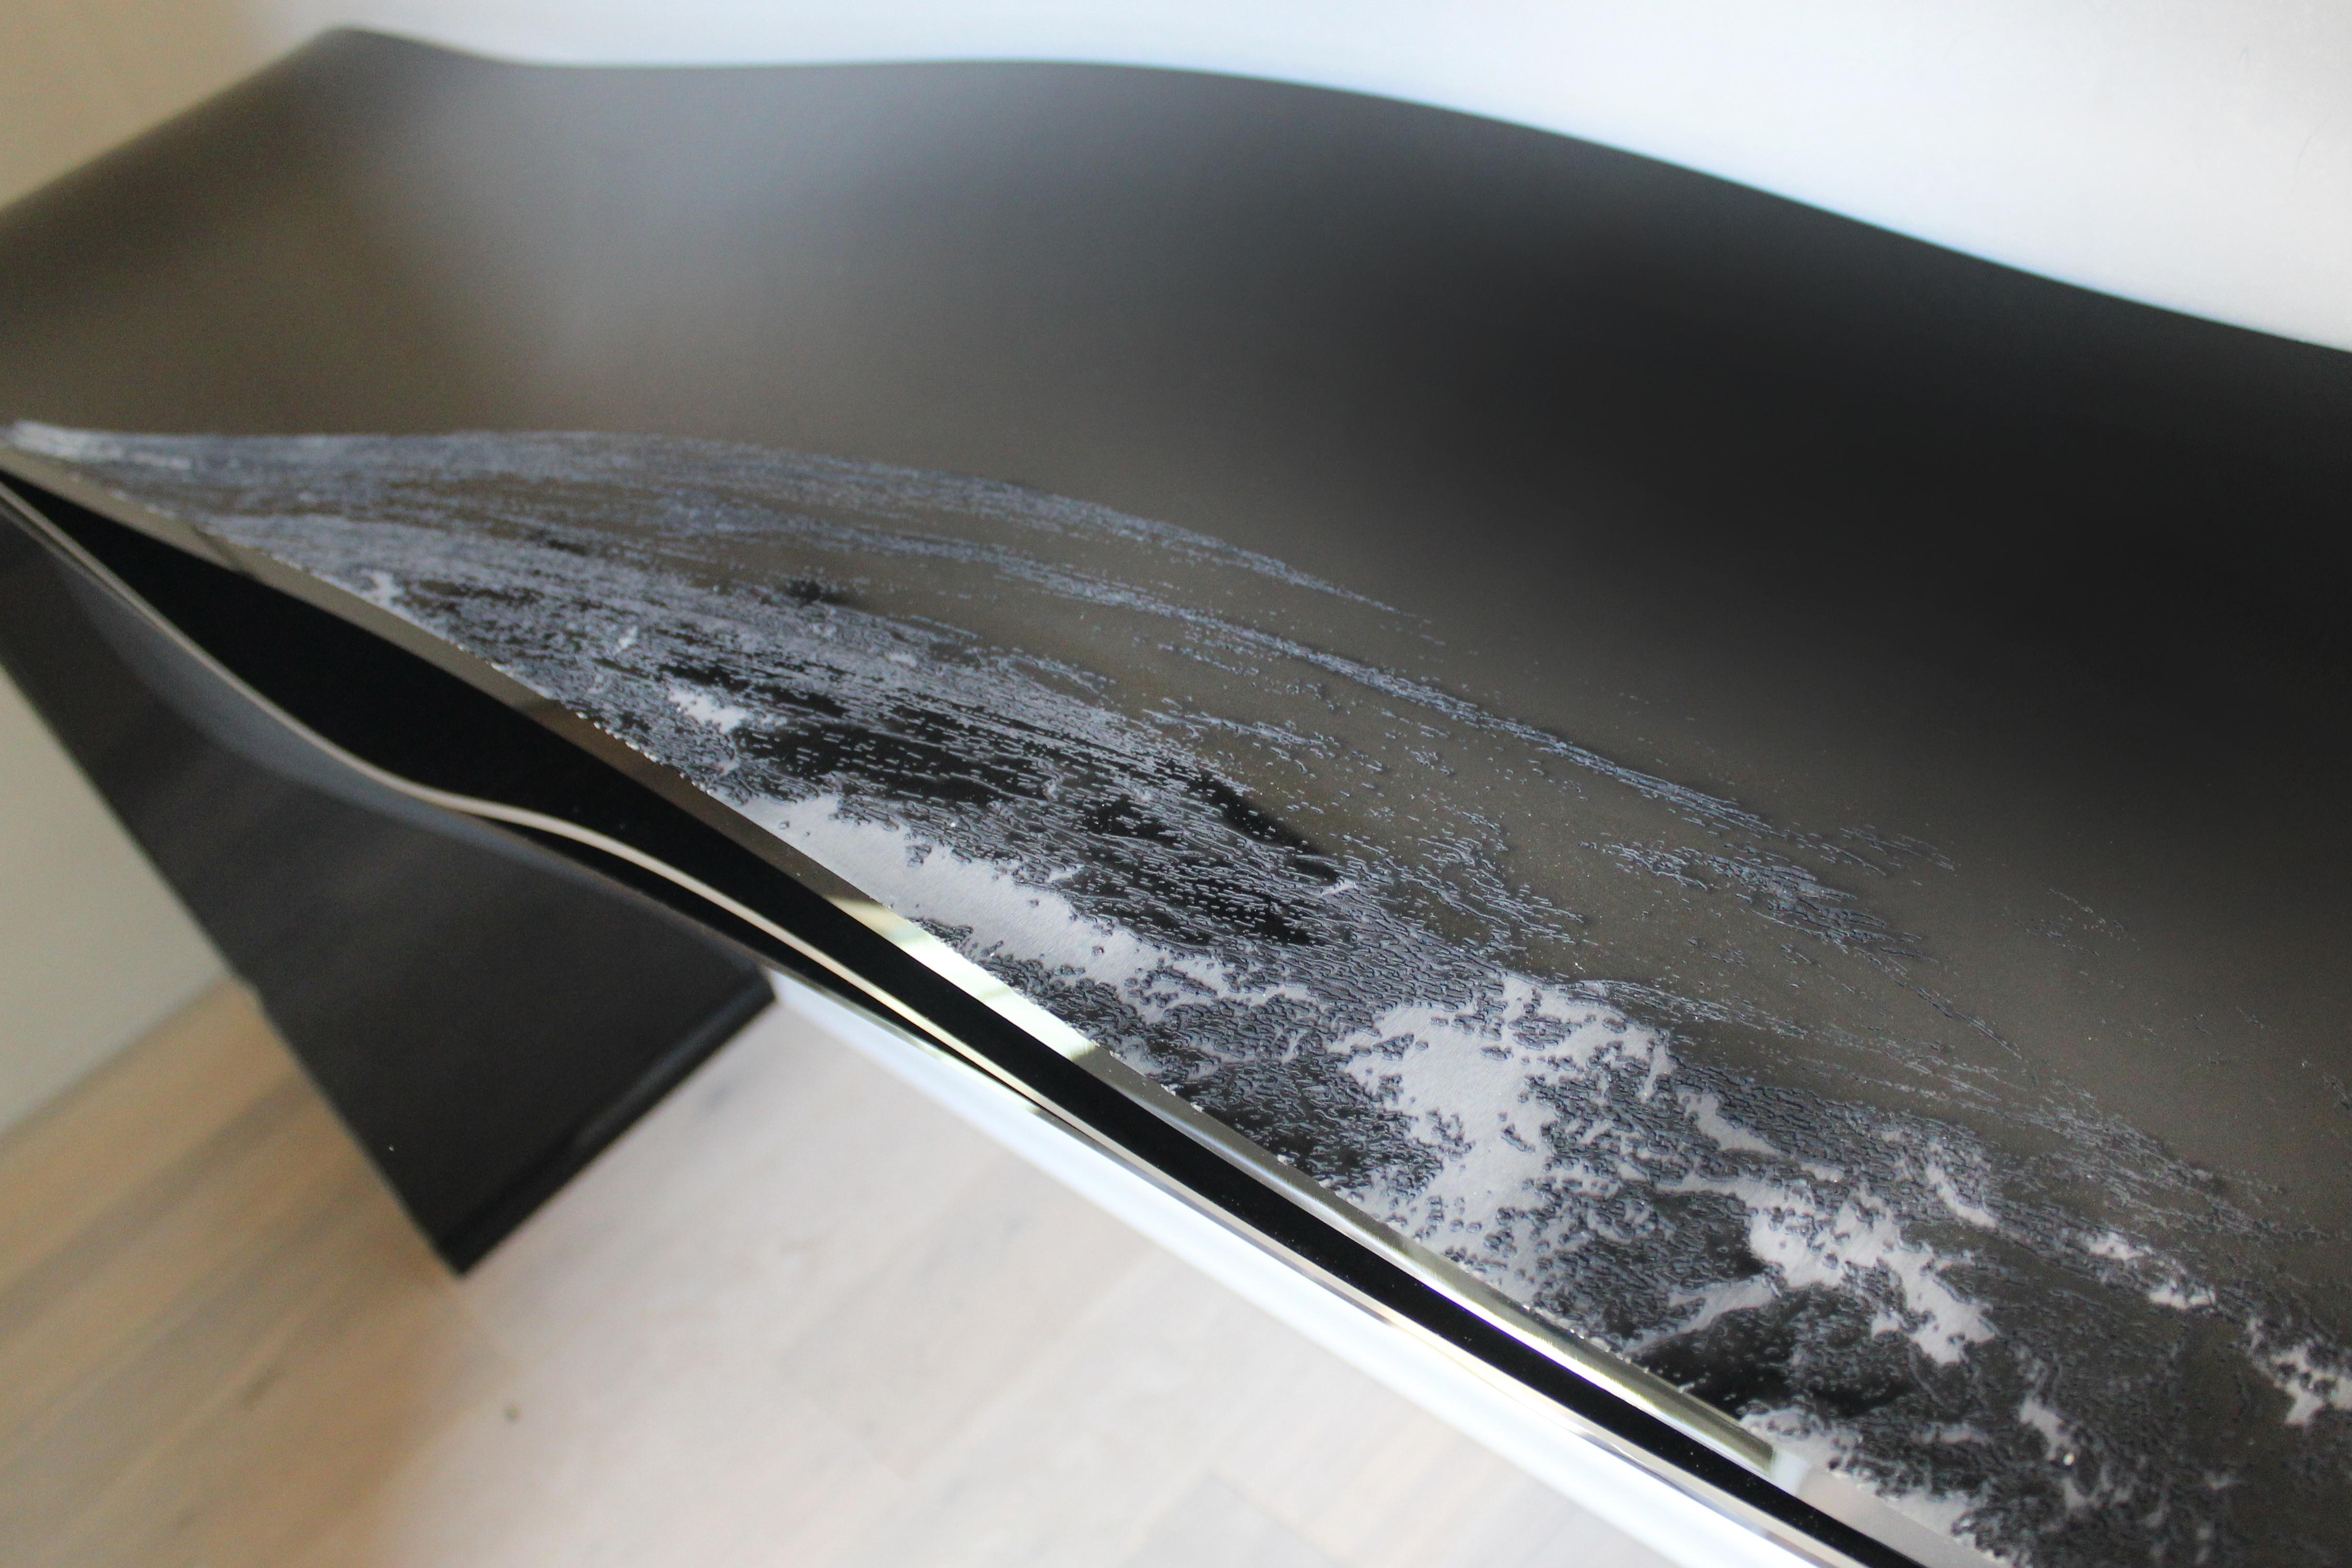 The console, Wave, created by the designer artist Raoul Gilioli, is part of a project inspired by the sea at night.
Wave has been produced by excellent Italian artisans with high quality materials. On the surface of the console, the artist has